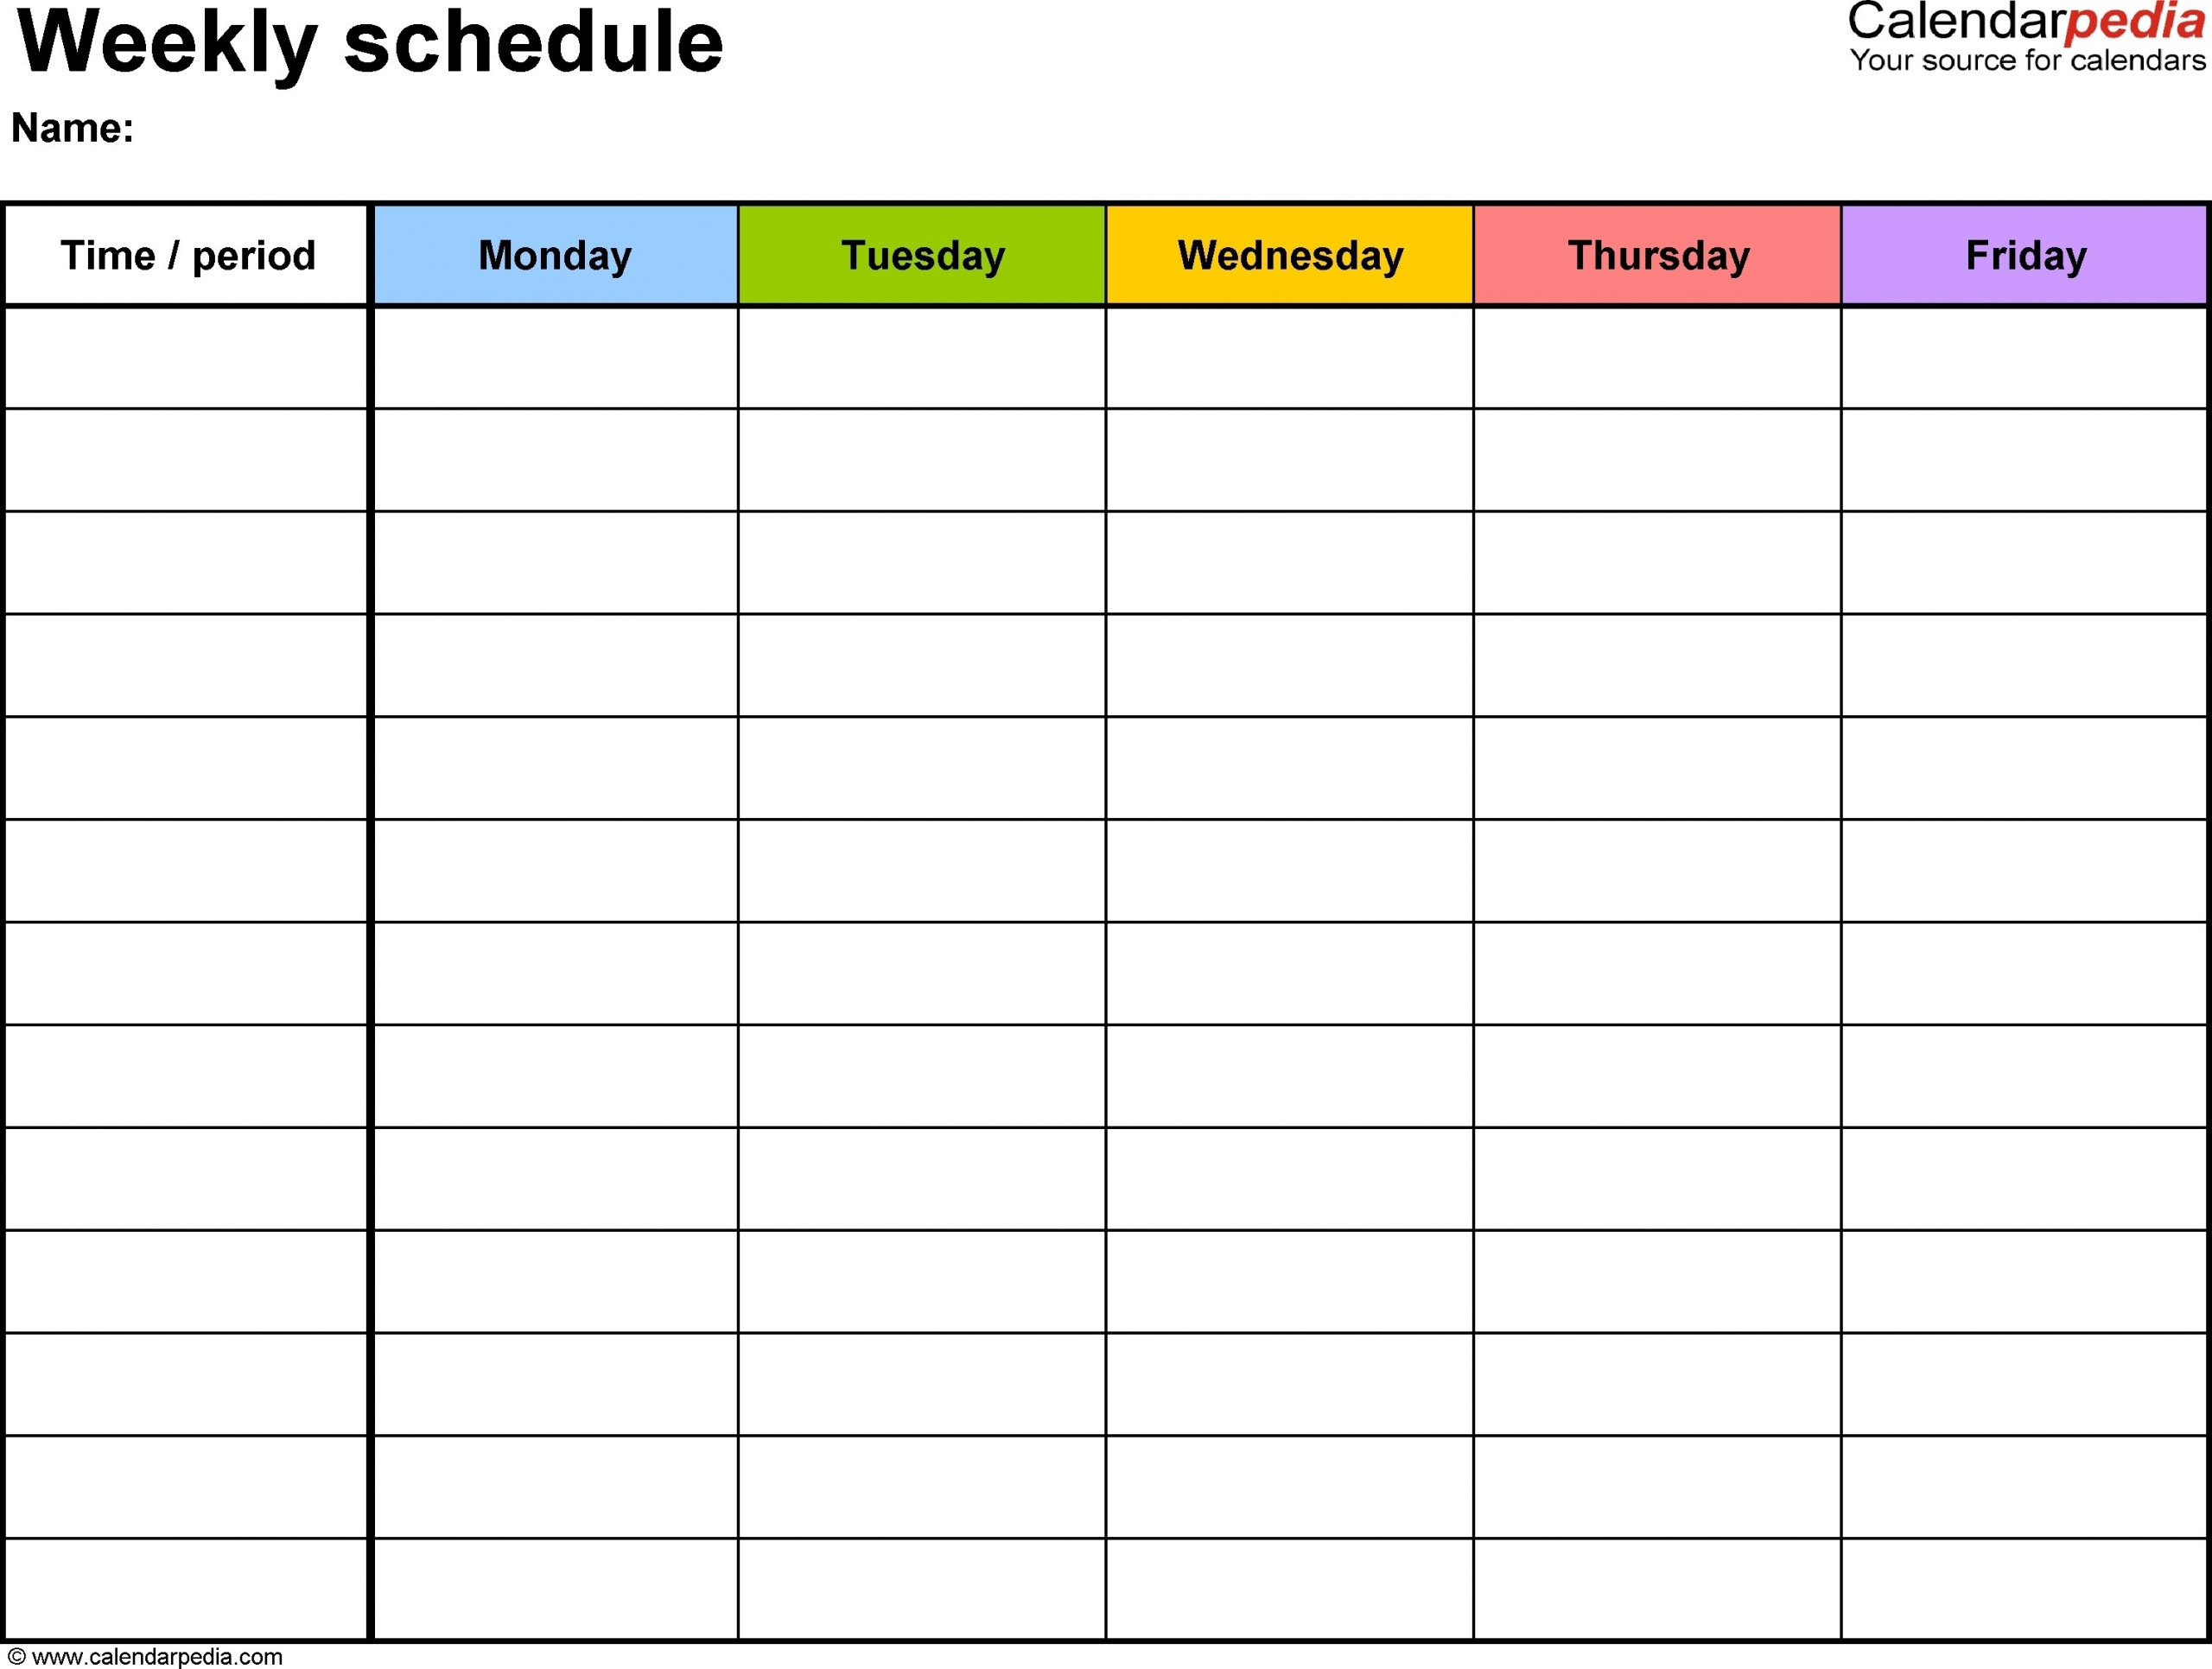 Schedule With Time Slots Printable | Printable Calendar